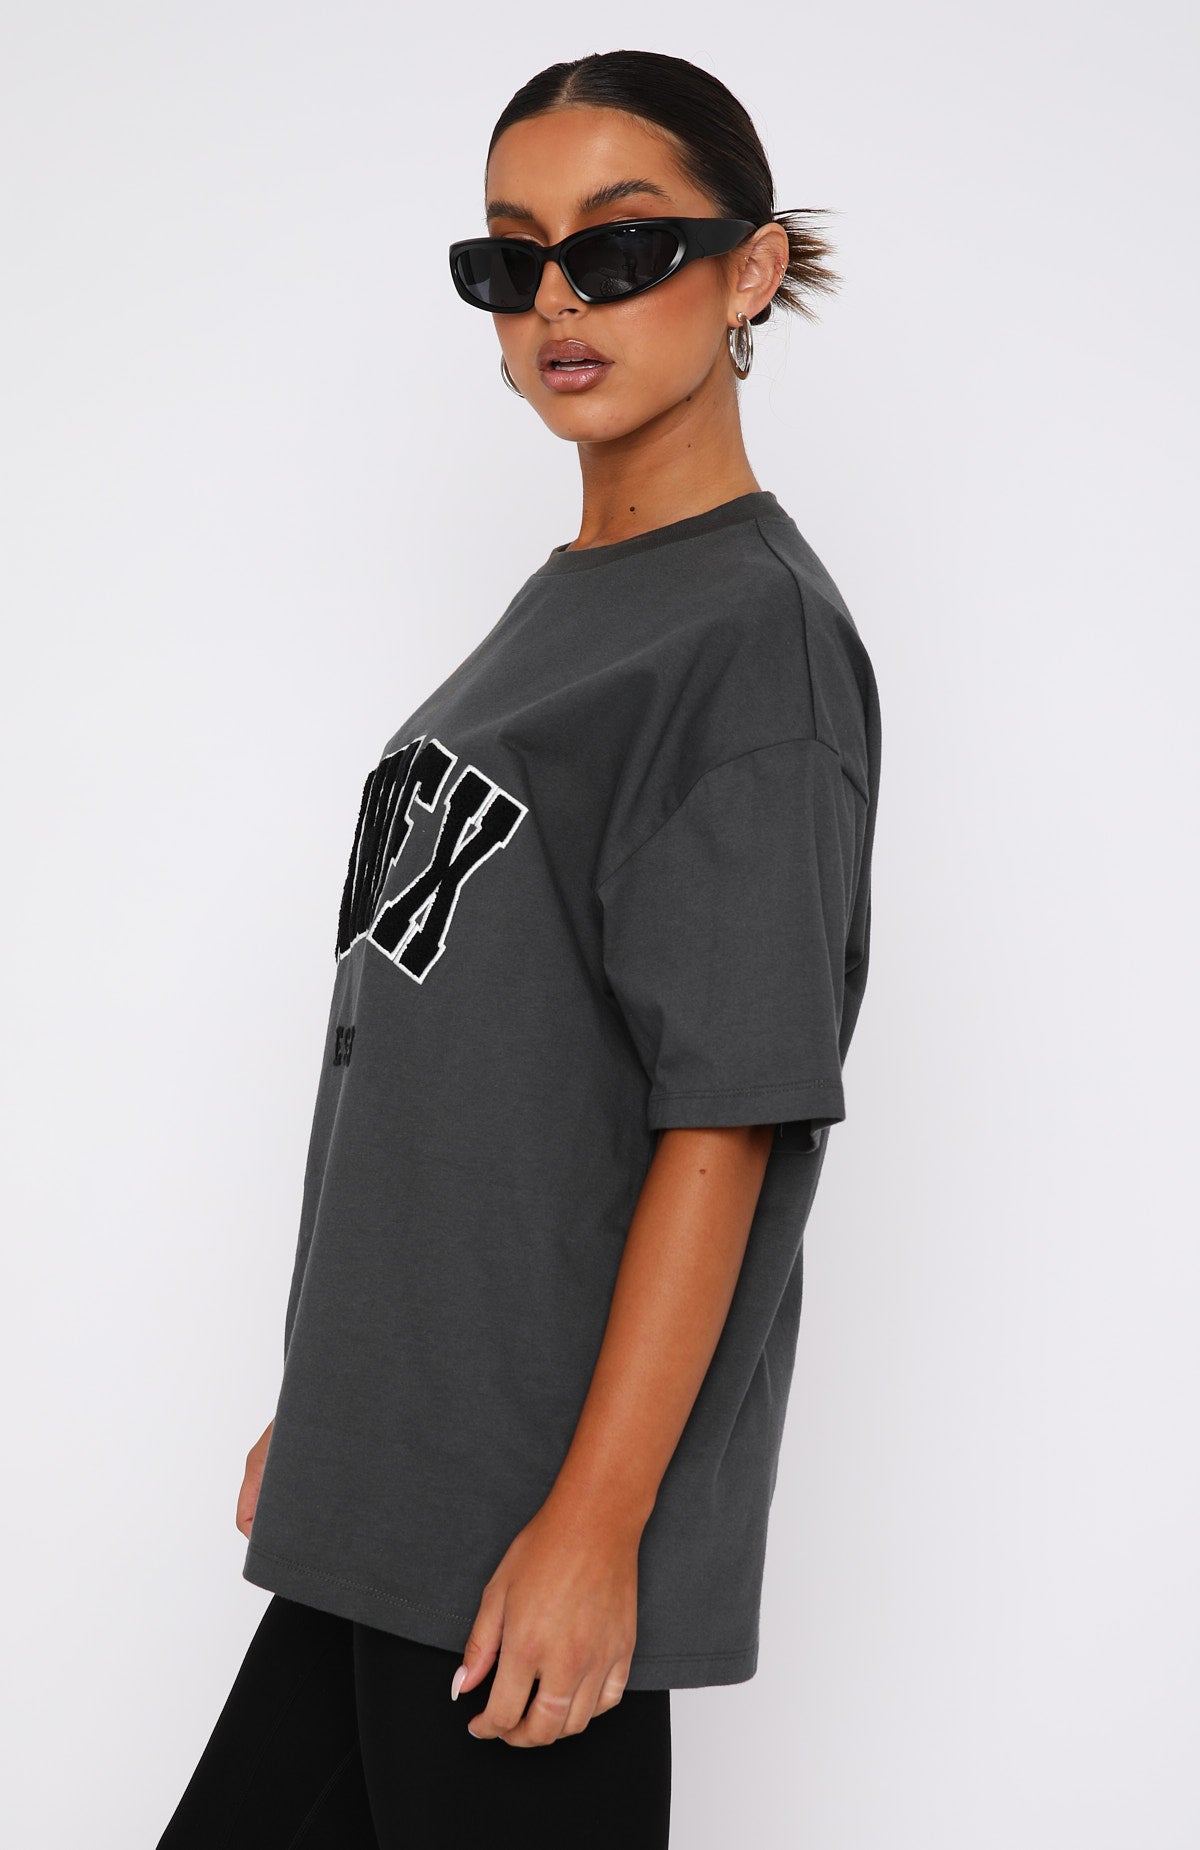 Give It Away Oversized Tee Charcoal | White Fox Boutique US